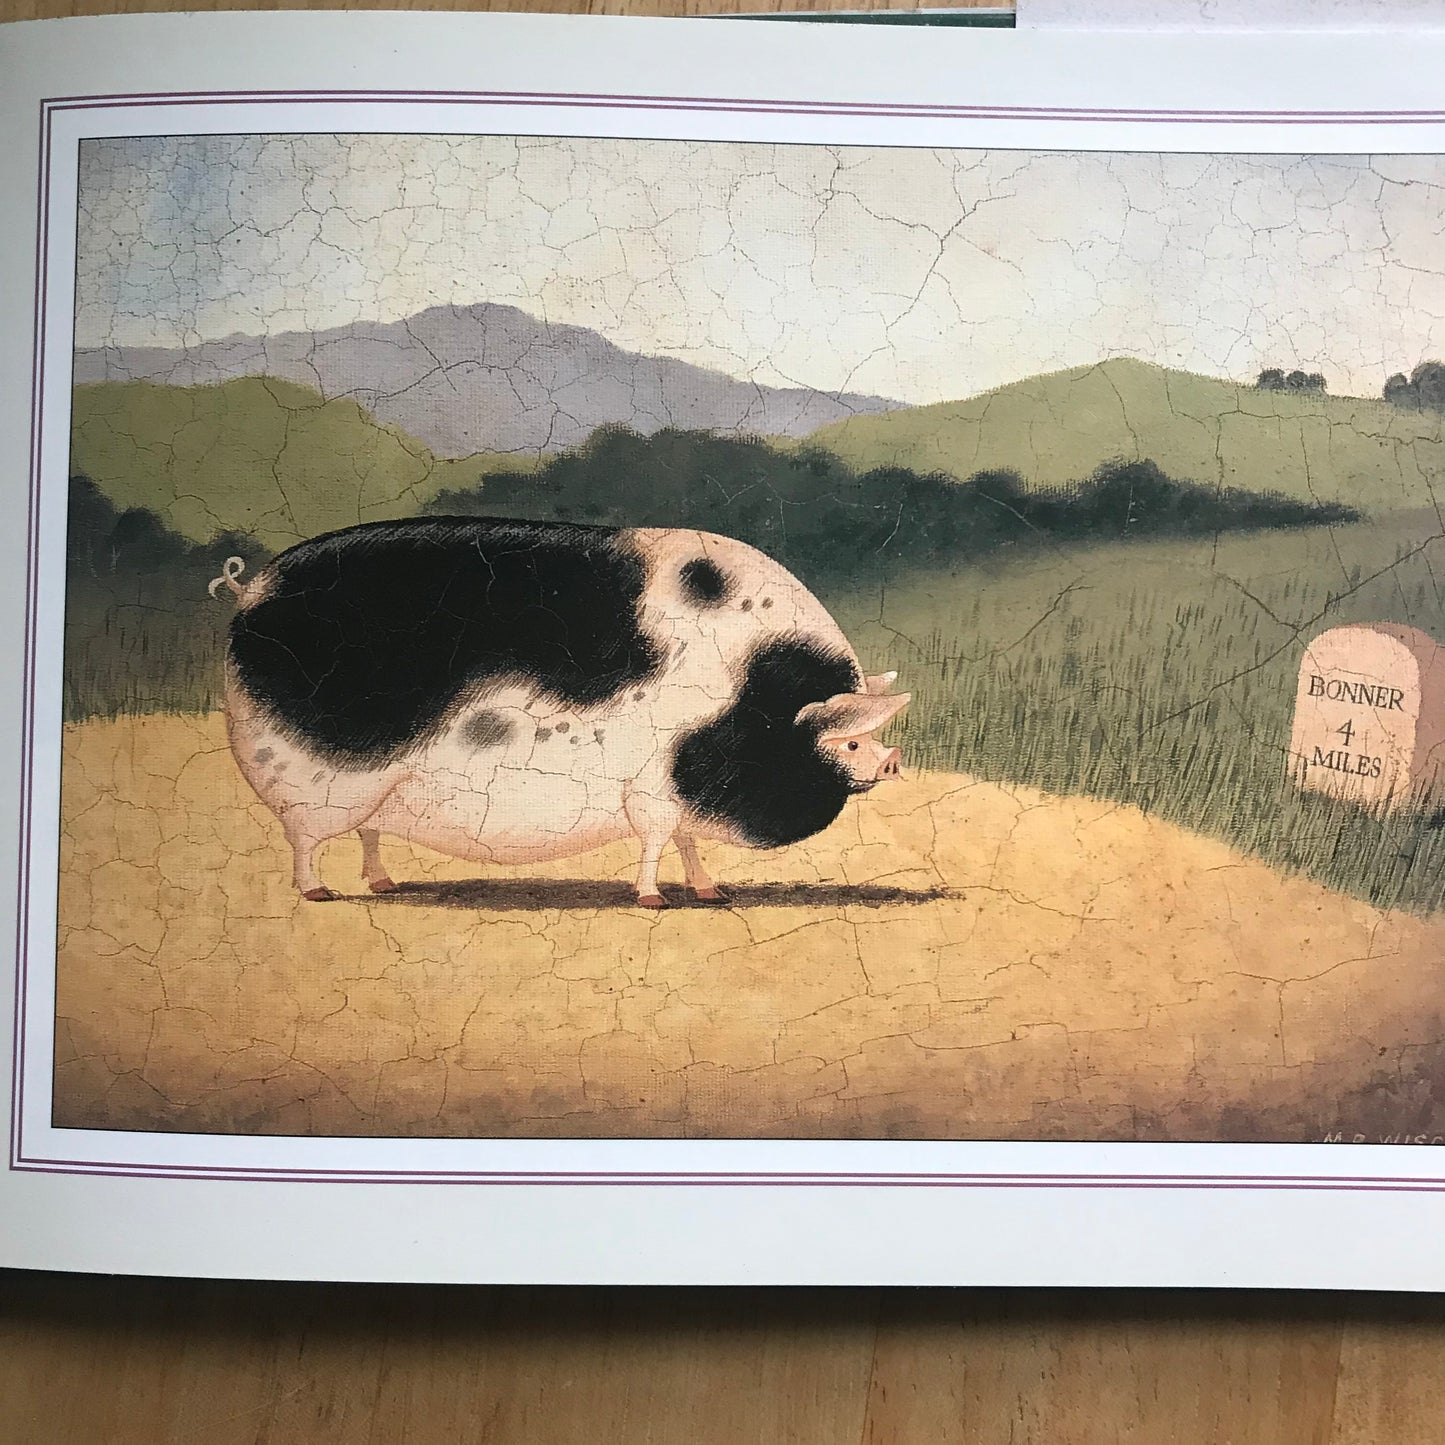 1996*1.* The Old Pig – Martin Wiscombe (Robinson's Publishers)